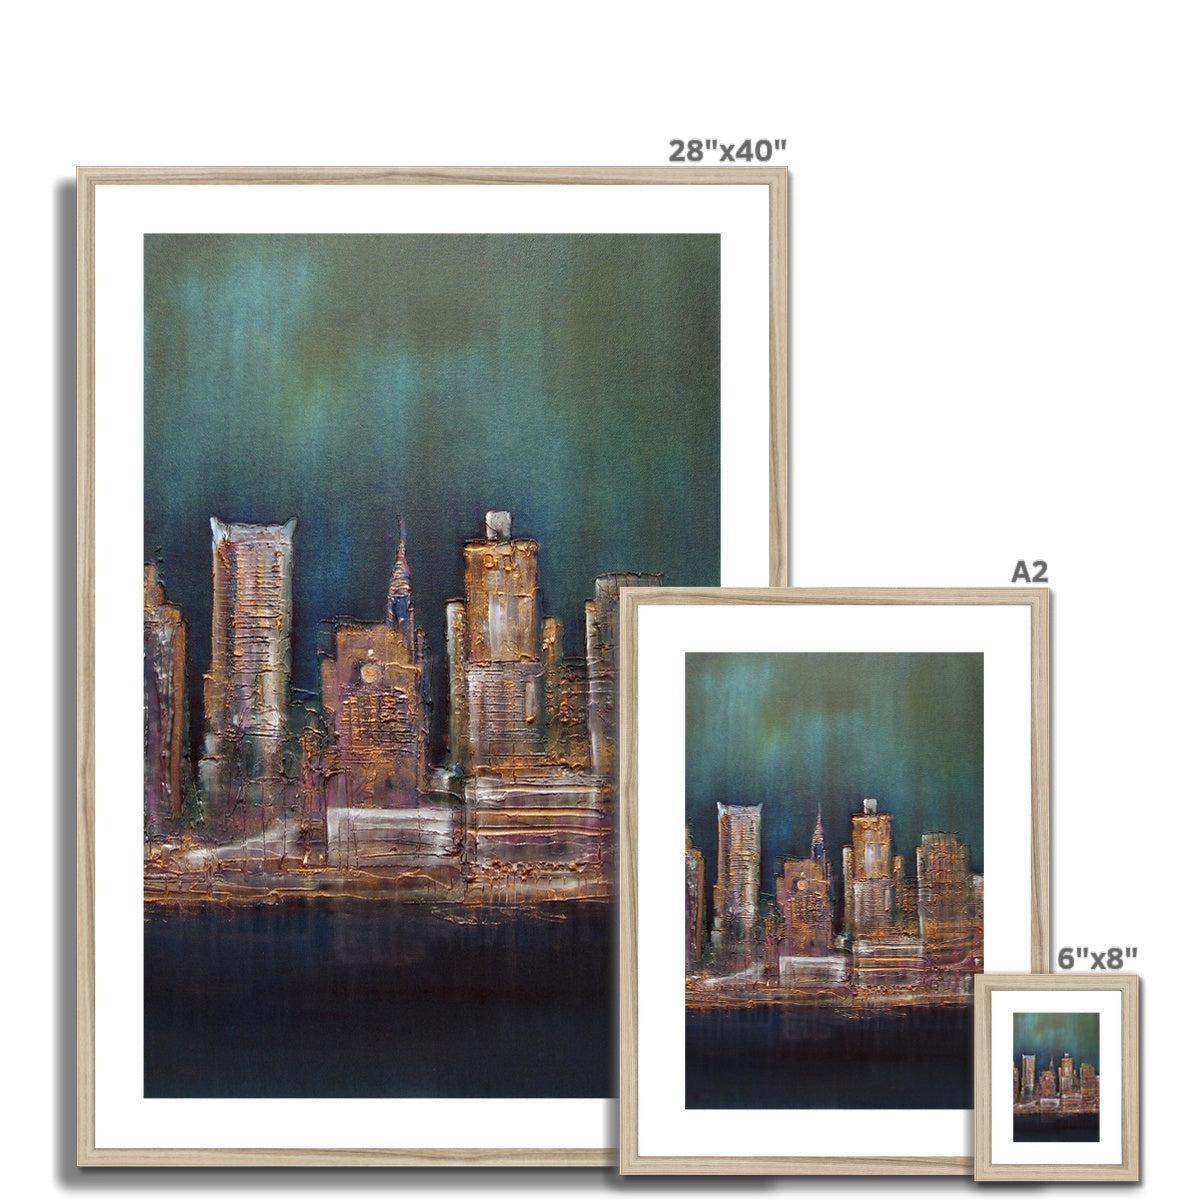 New York West Side Painting | Framed & Mounted Prints From Scotland-Framed & Mounted Prints-World Art Gallery-Paintings, Prints, Homeware, Art Gifts From Scotland By Scottish Artist Kevin Hunter